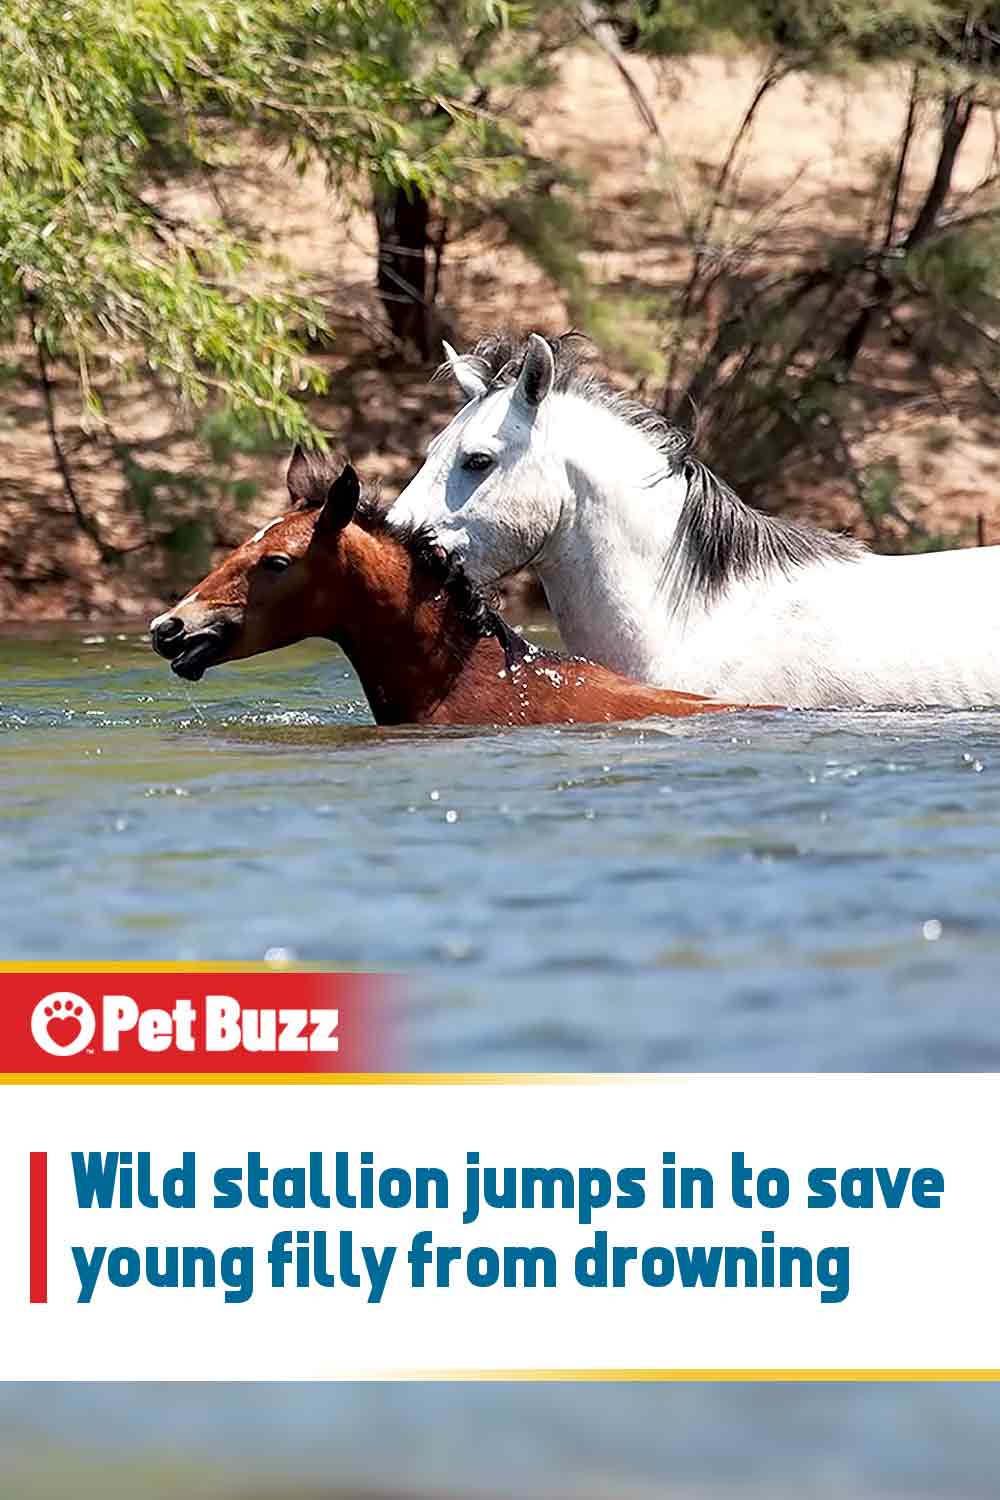 Wild stallion jumps in to save young filly from drowning